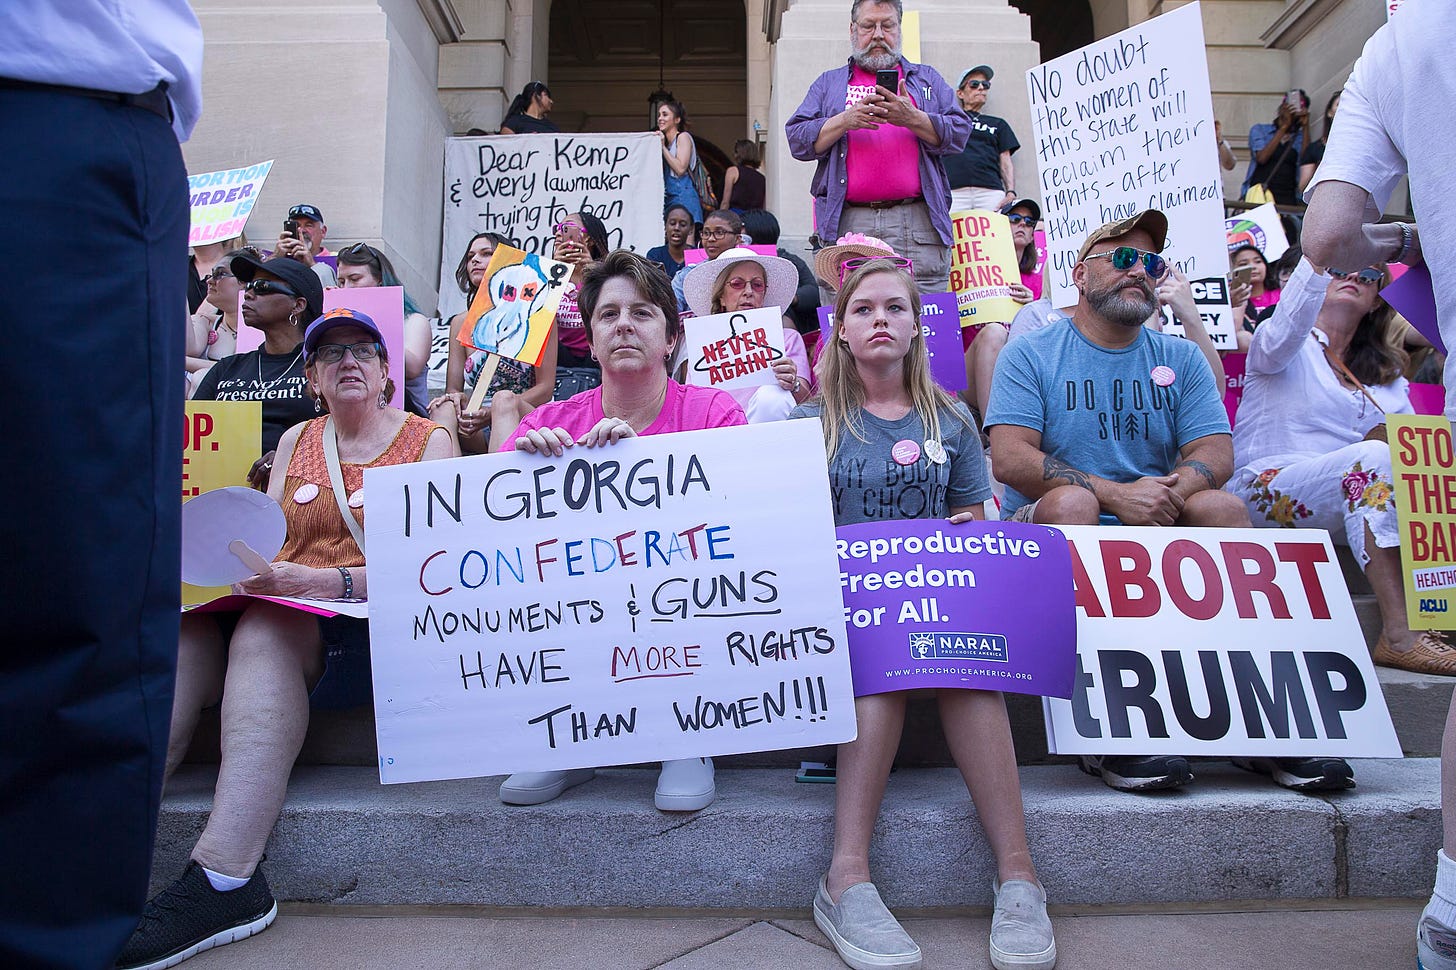 Abortion rights advocates rally at Georgia Capitol